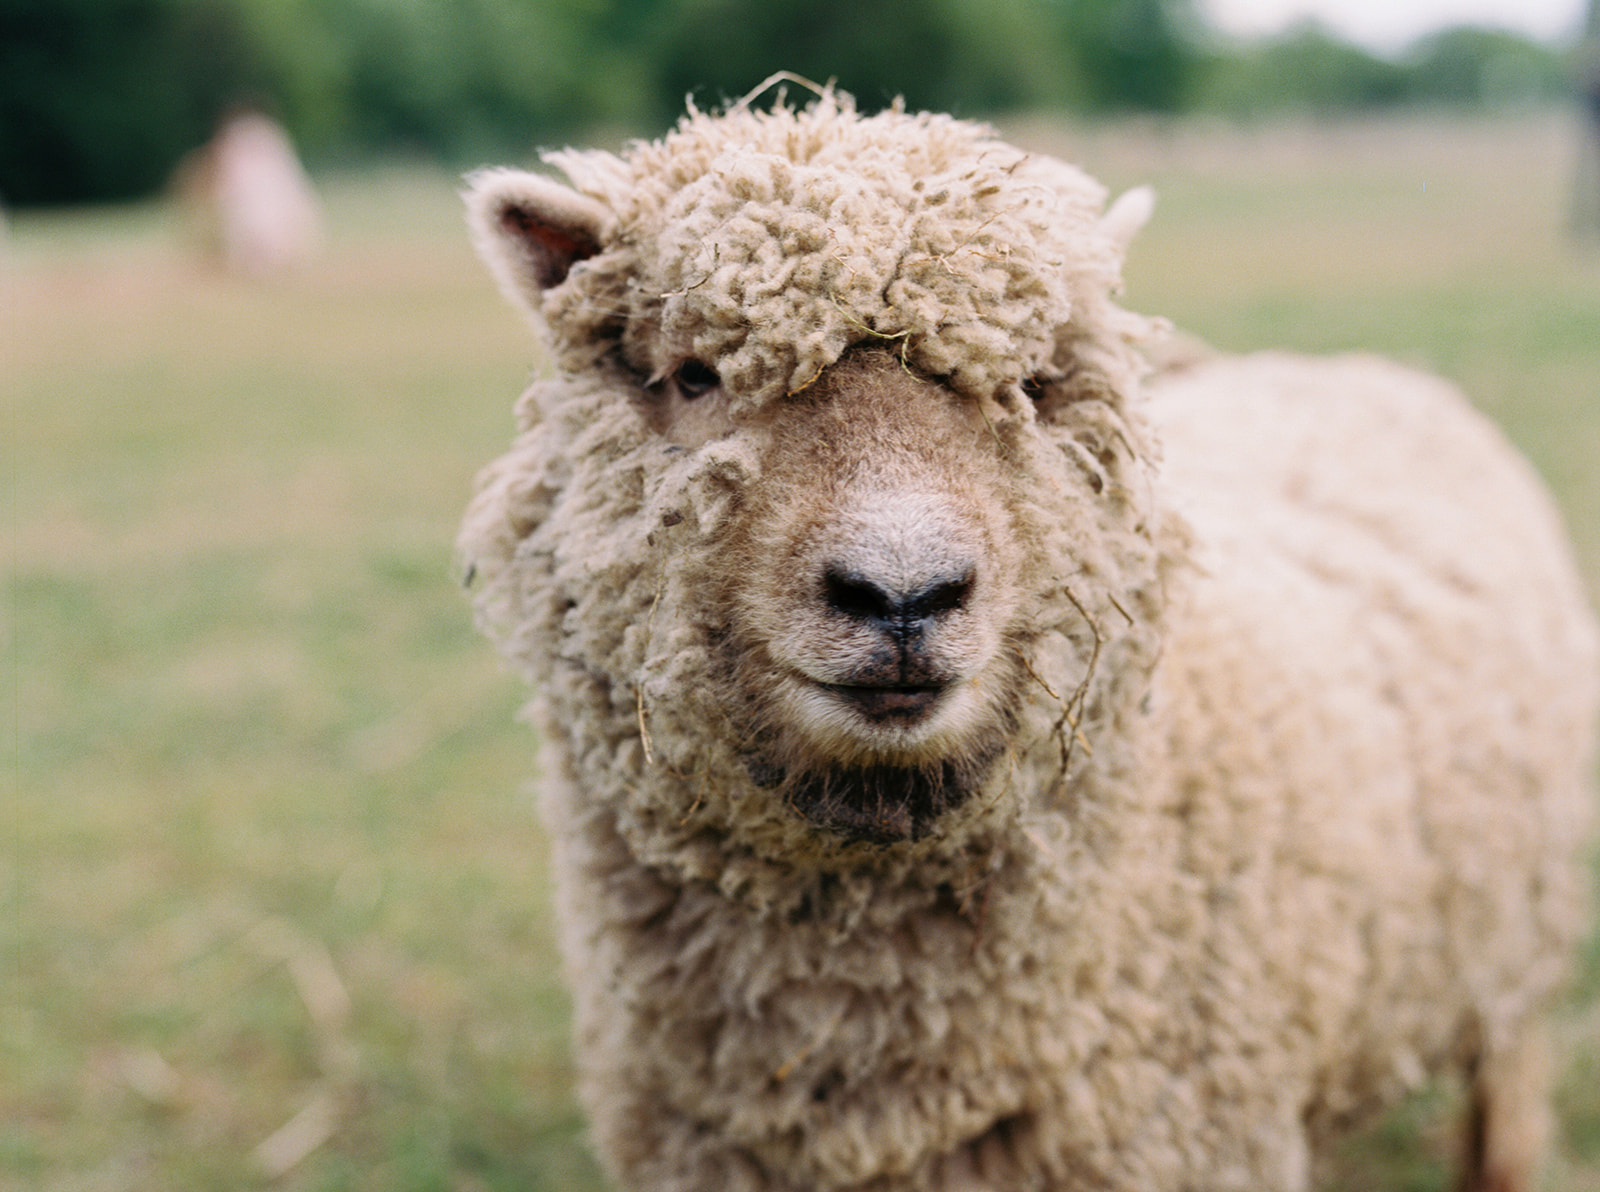 Babydoll Sheep are gentle, adorable, low-maintenance, yet productive—the perfect addition to your homestead or hobby farm! If you’re looking to start your own flock, this post covers everything you need to know: